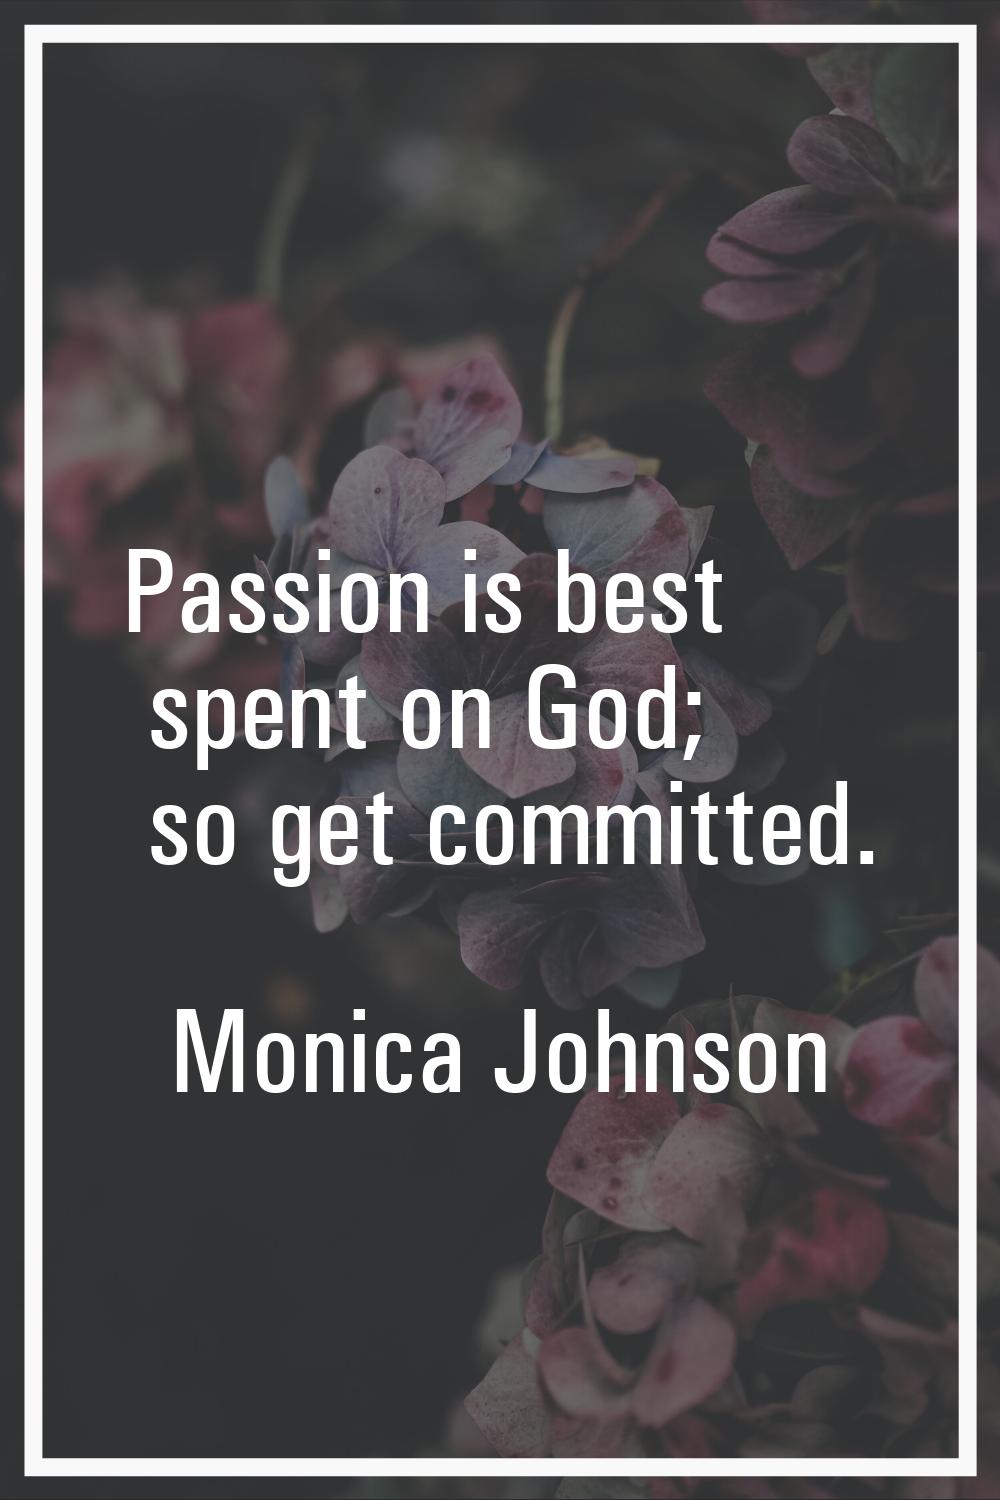 Passion is best spent on God; so get committed.